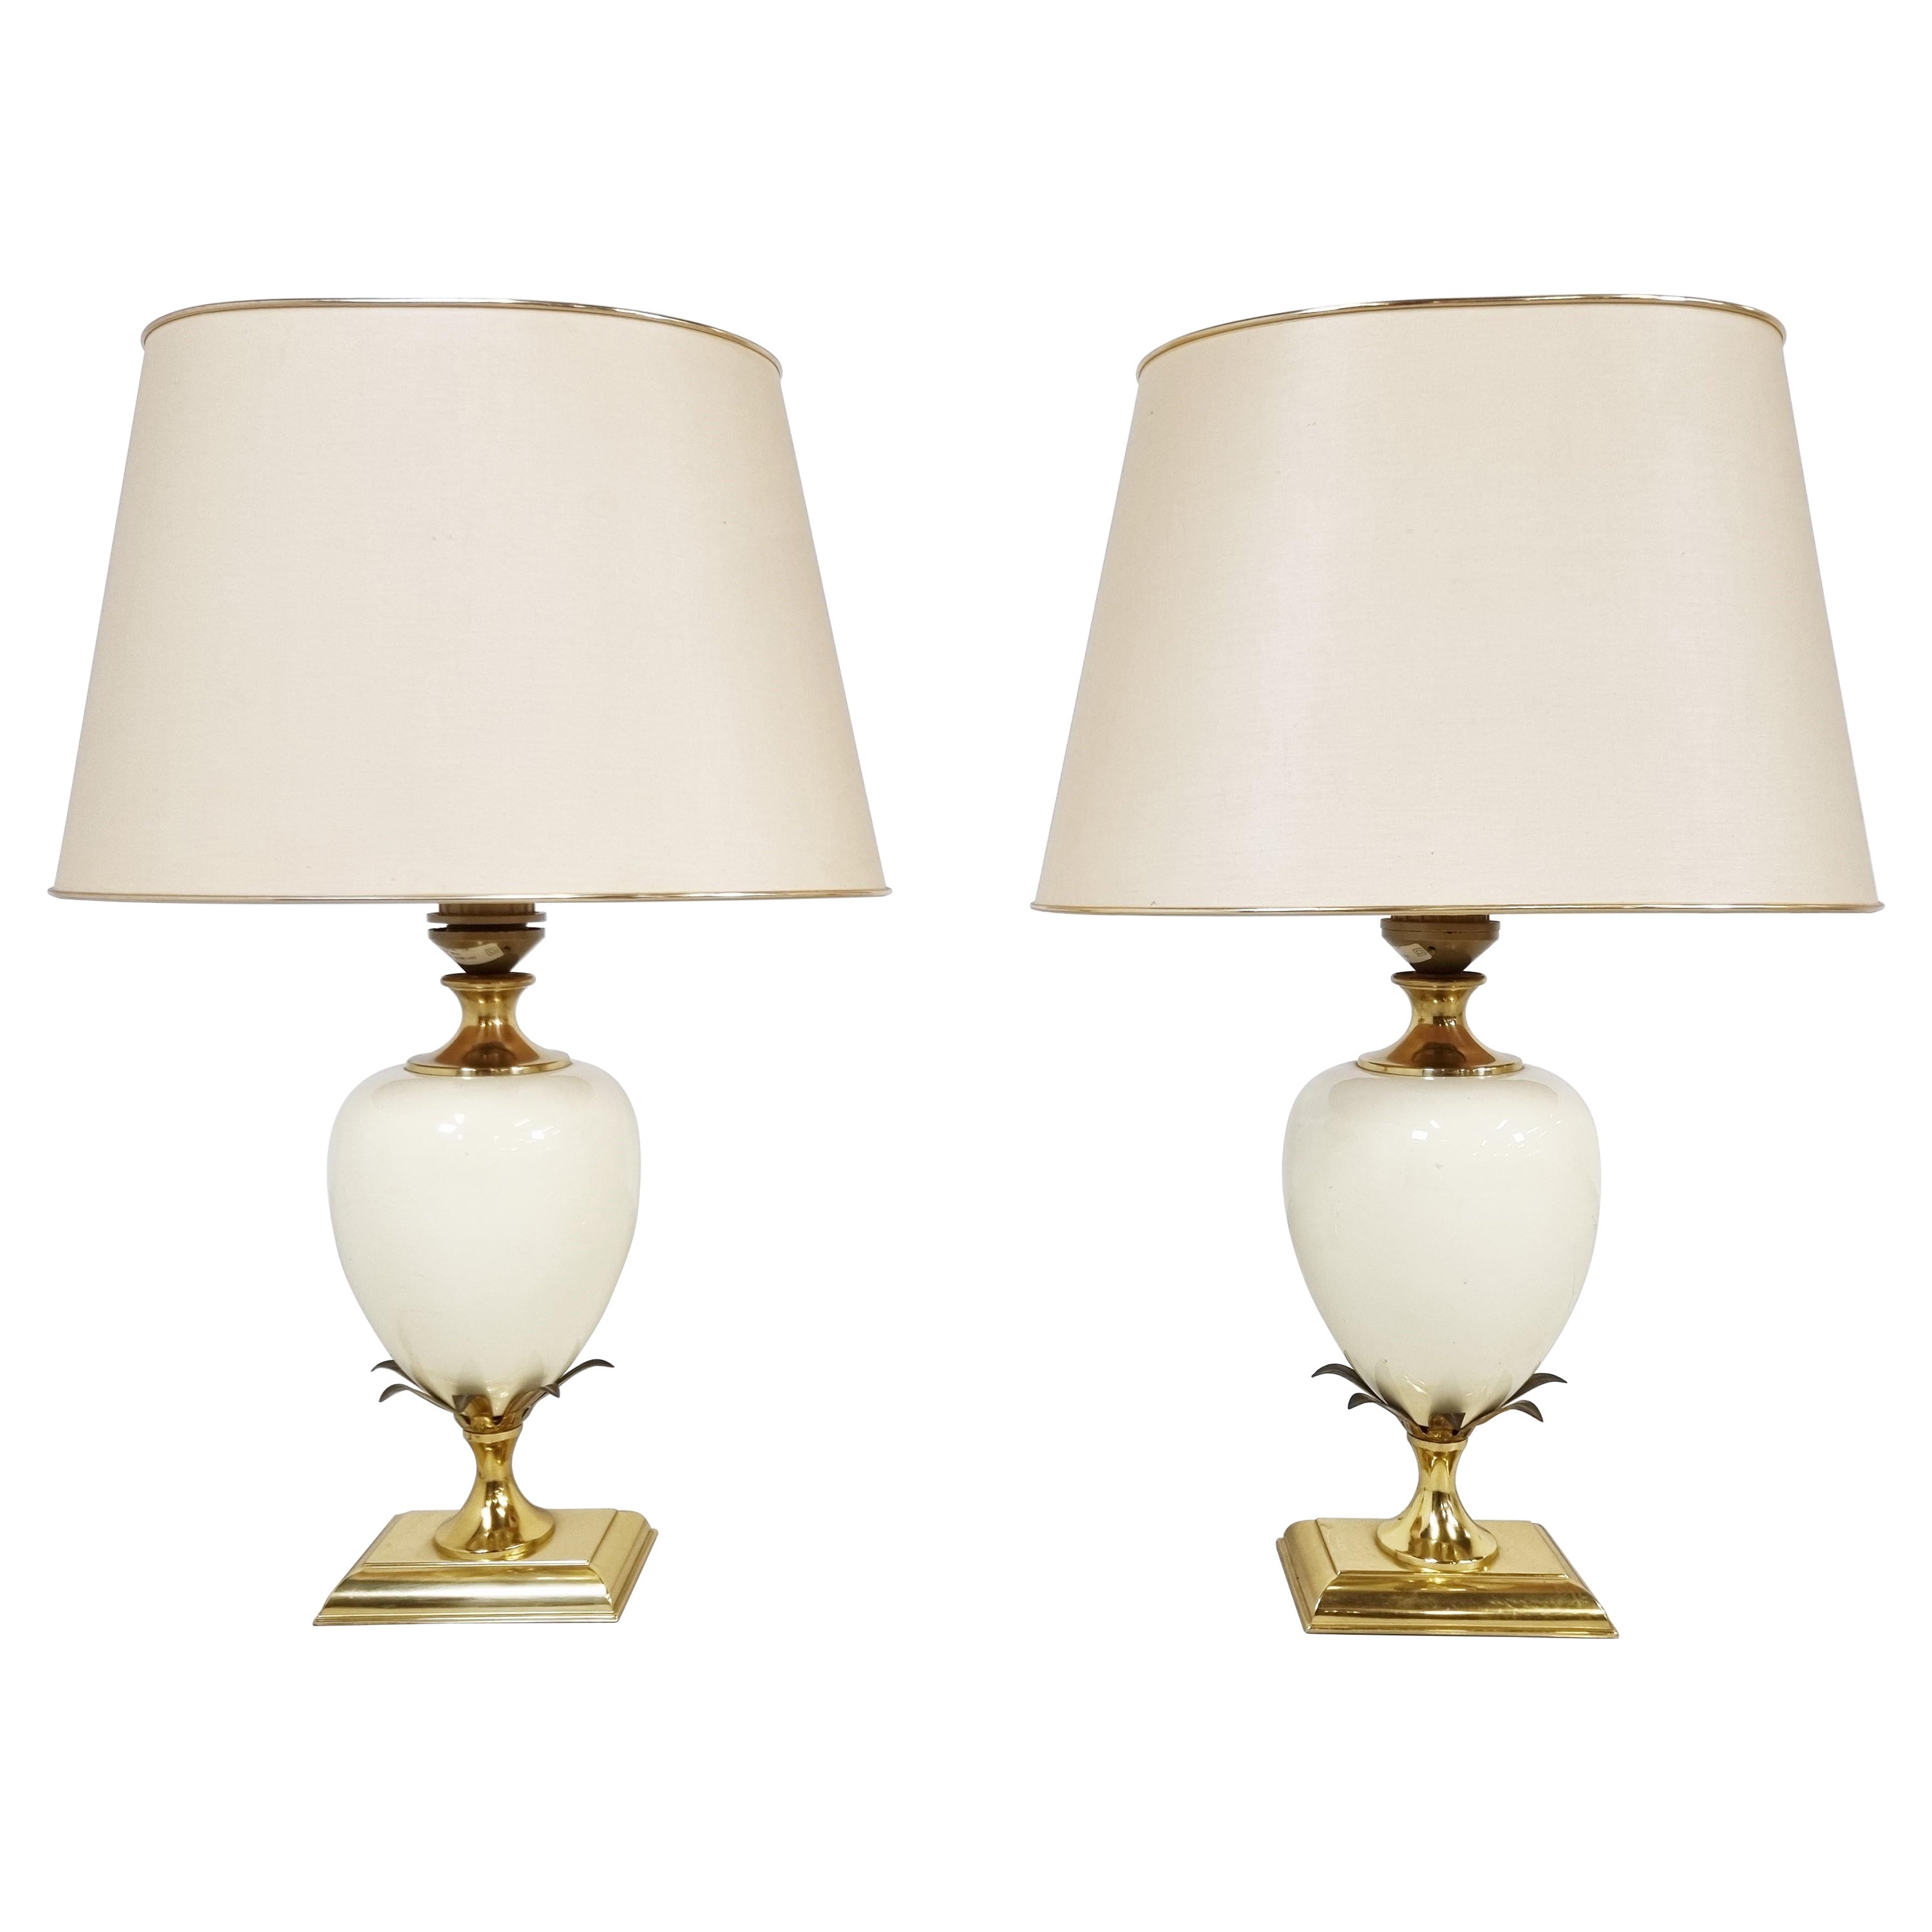 Pair of Vintage Pineapple Table Lamps by Maison Le Dauphin, 1970s